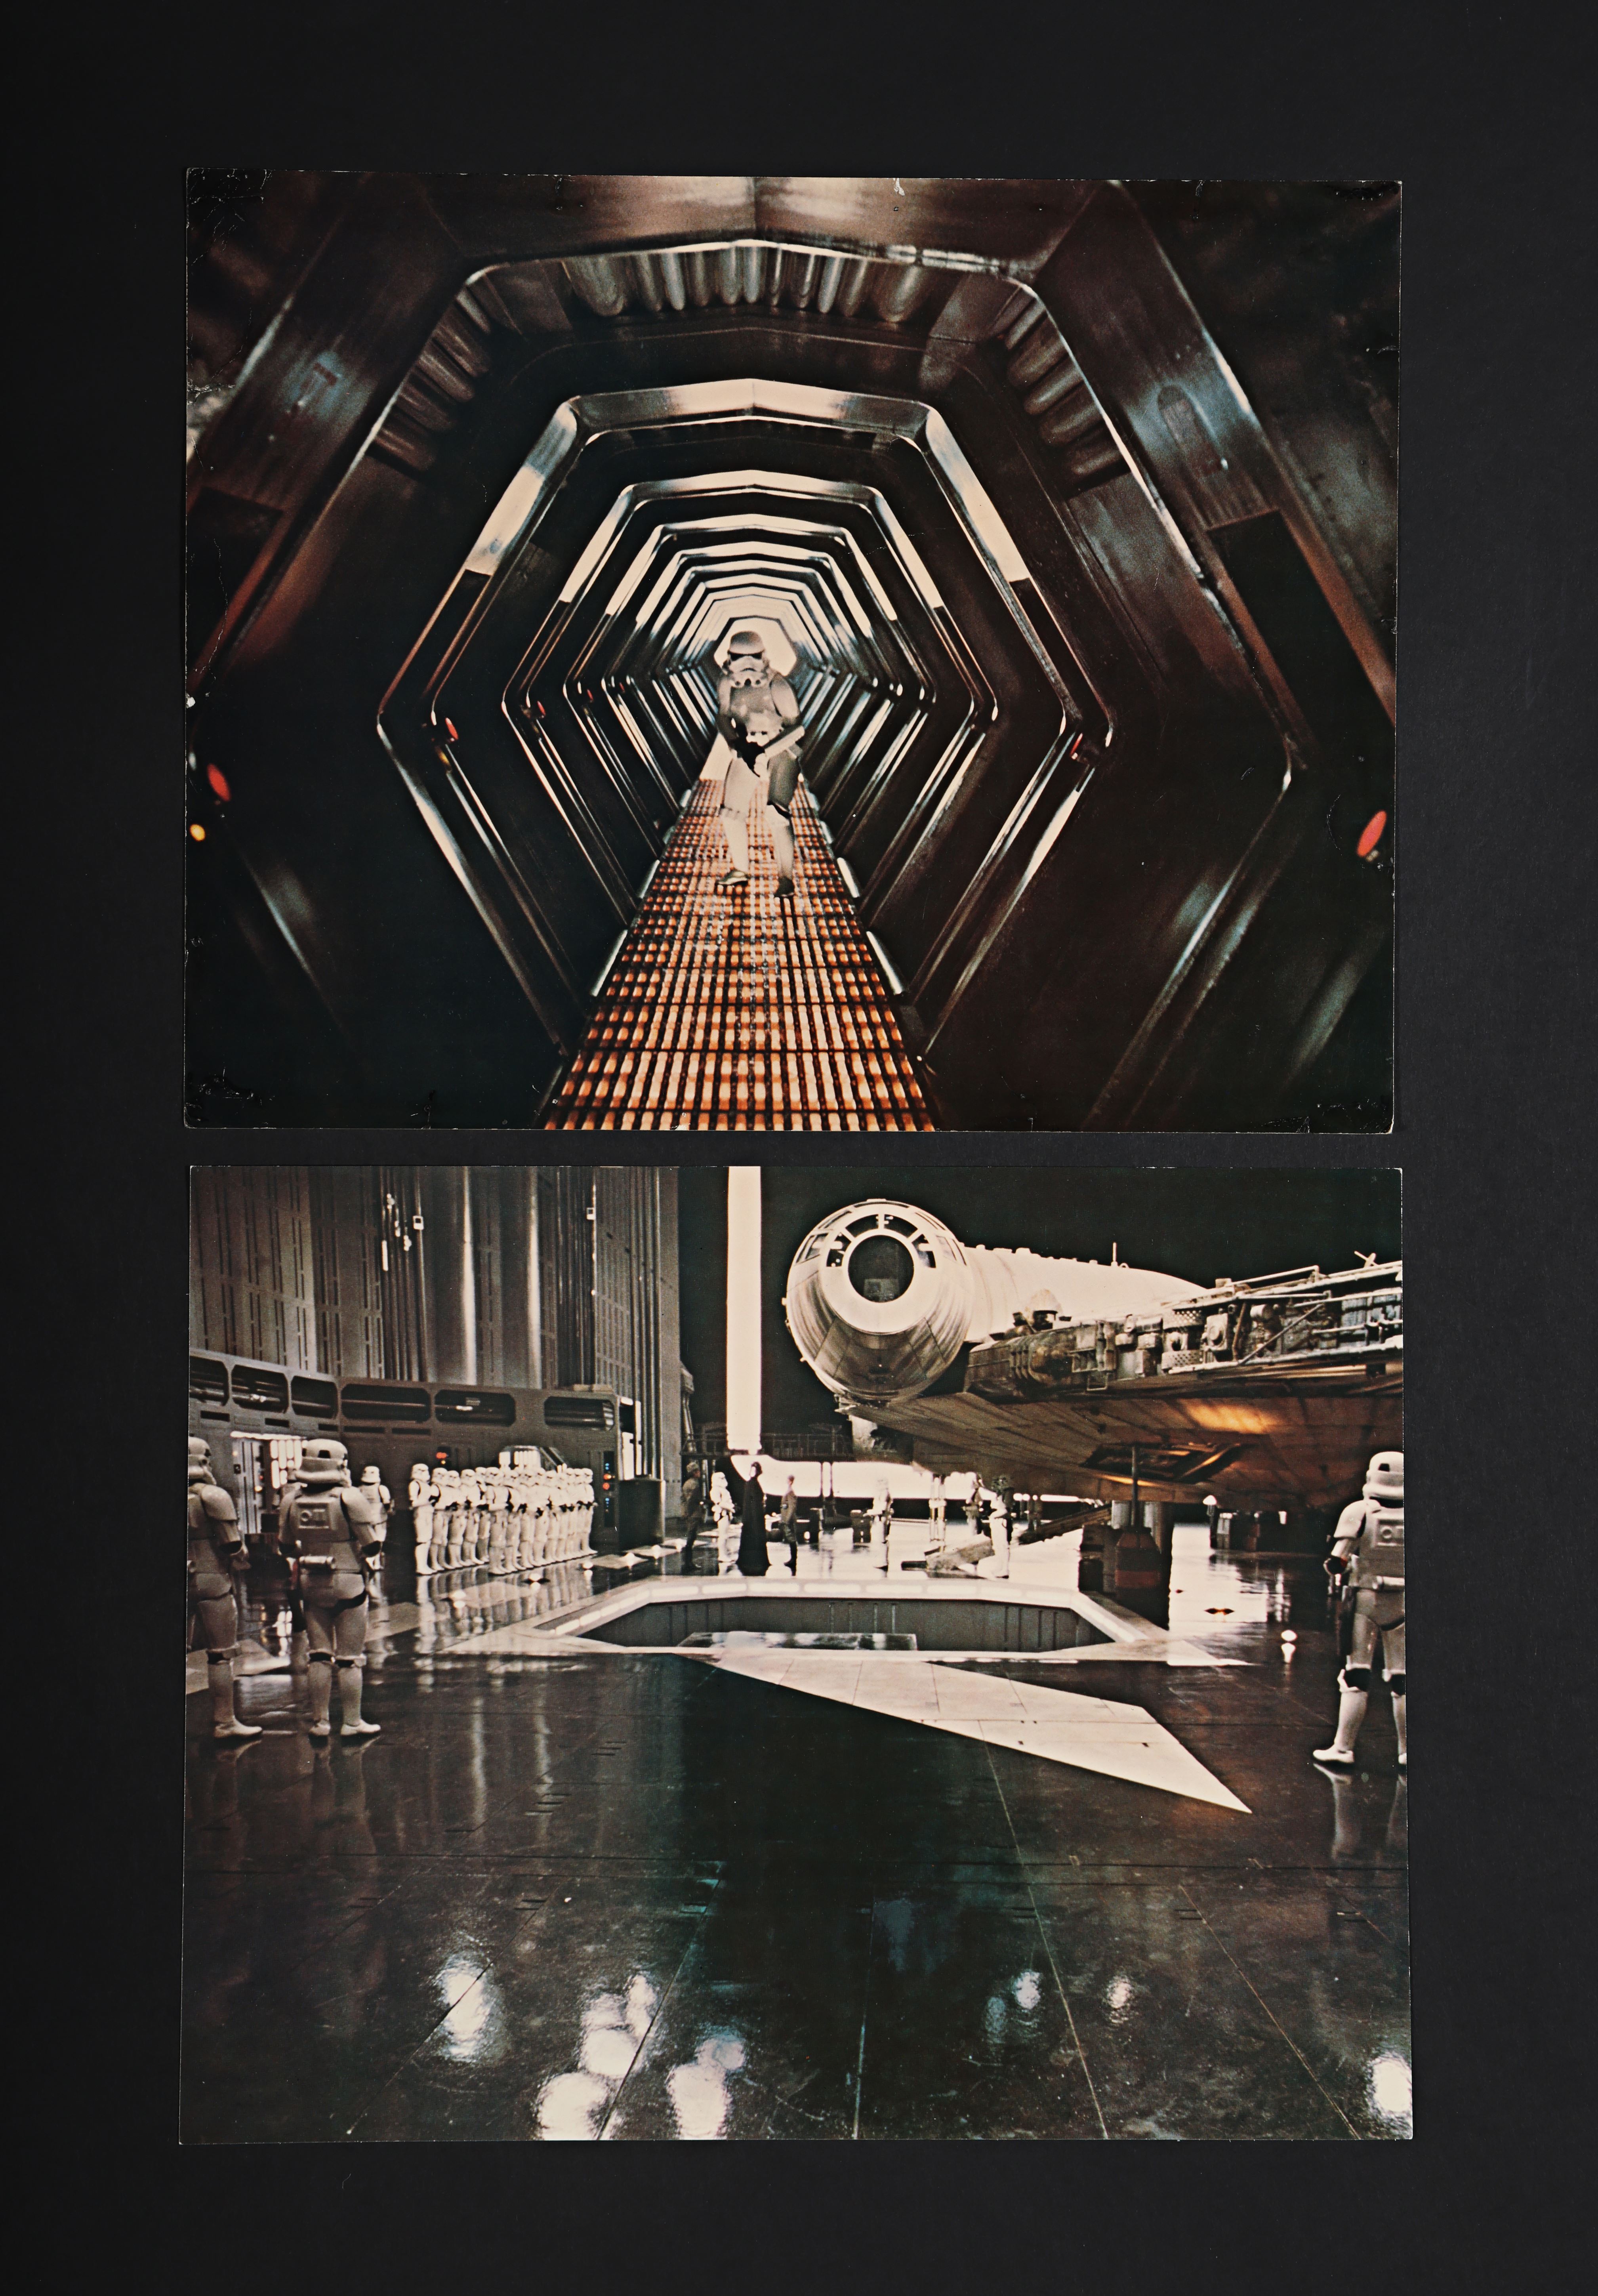 STAR WARS: A NEW HOPE (1977) - David Frangioni Collection: Set of Eight 14 x 11 Stills, 1977 - Image 4 of 4